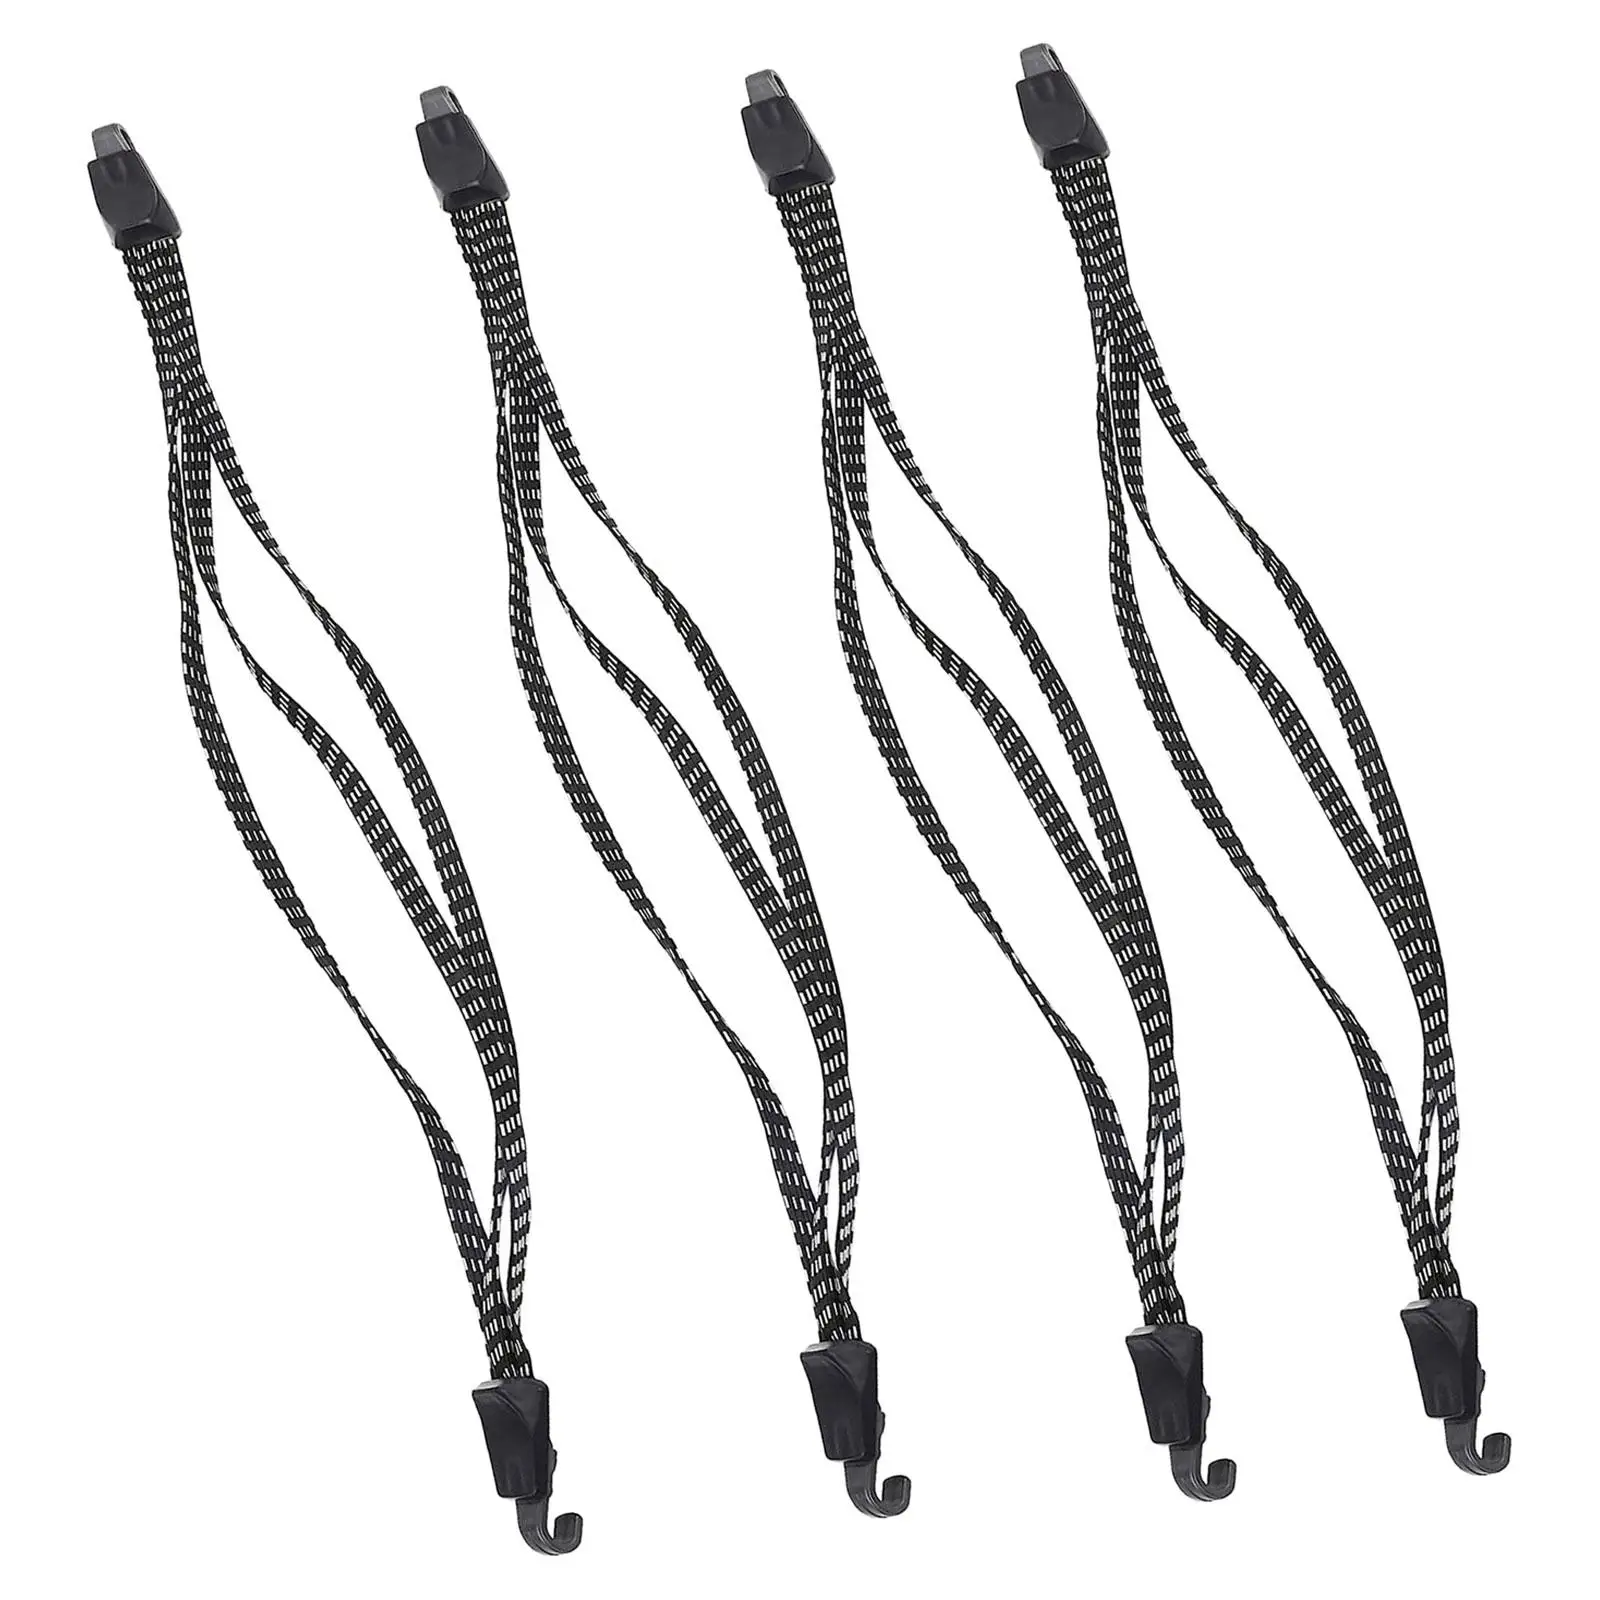 4Pcs Bike Luggage Rope 3 in 1 Strap Stretch Belt Motorcycle Luggage Rack Tie Down Straps for Bicycle Camping Cargo Cart Tie Down